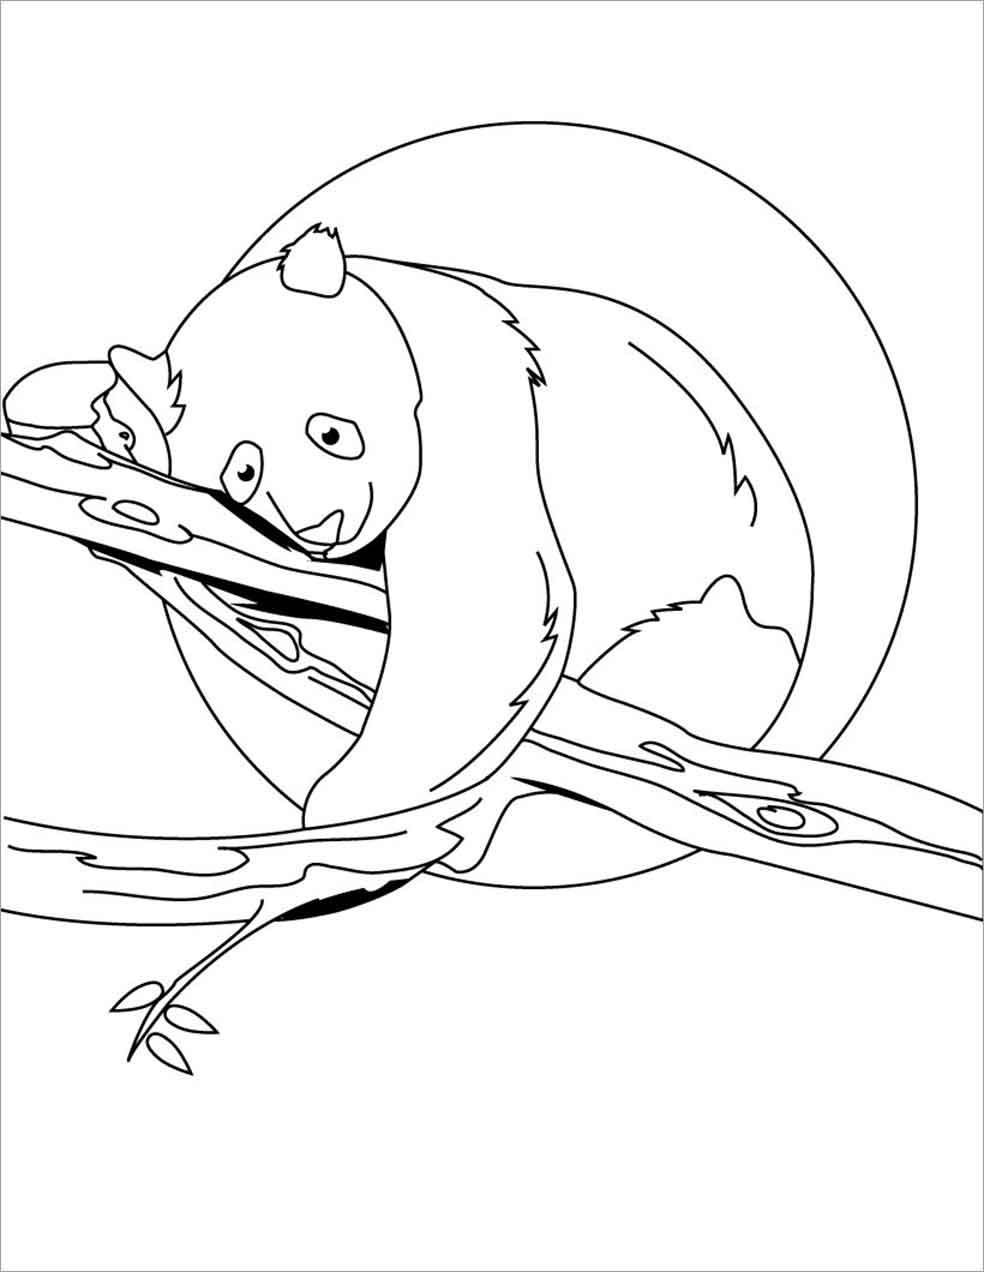 Panda Lives on Trees Coloring Pages